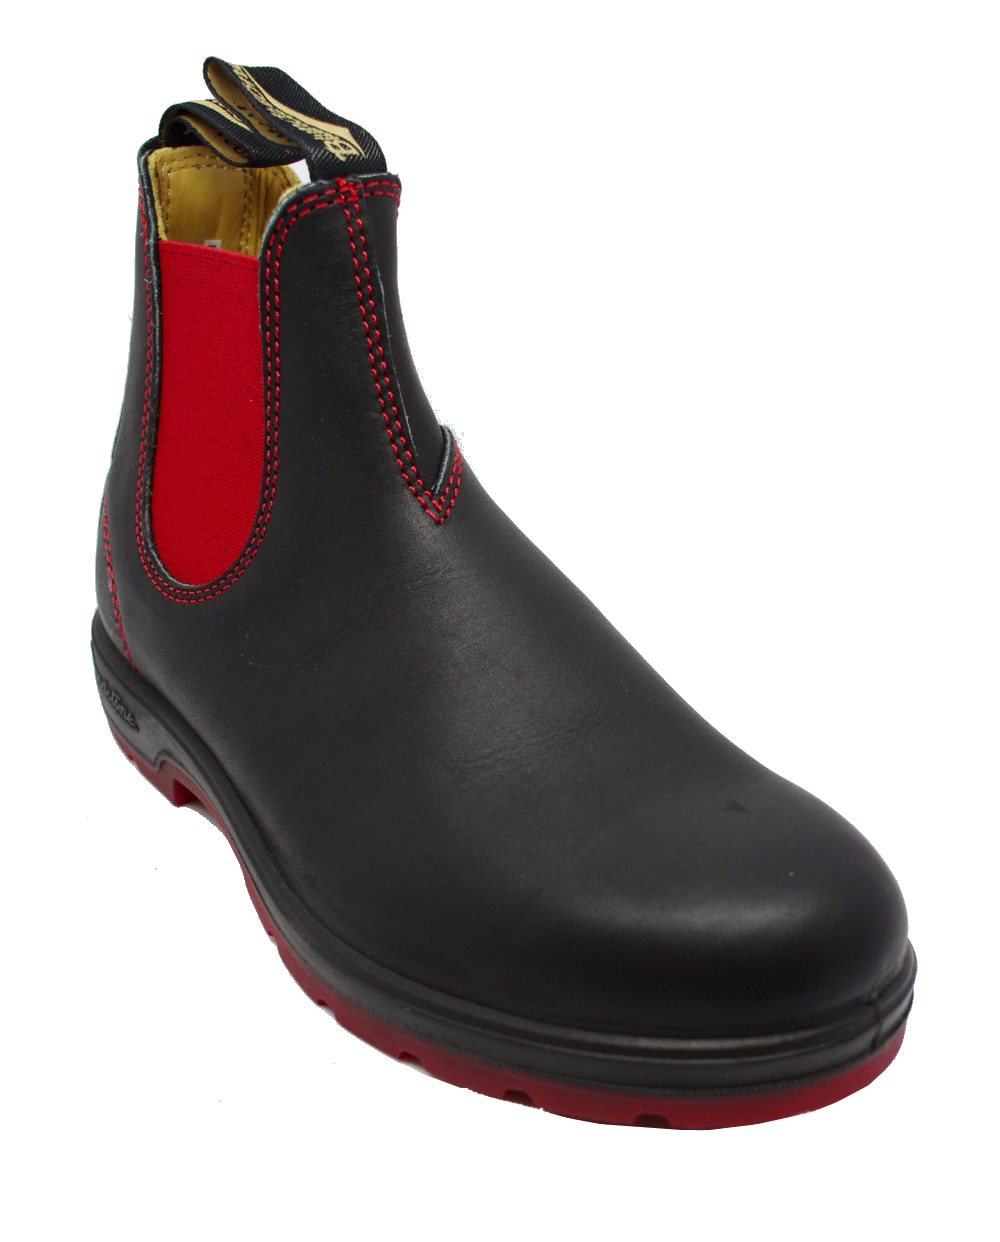 Blundstone 1316 Chelsea Boot in Black Red Sole